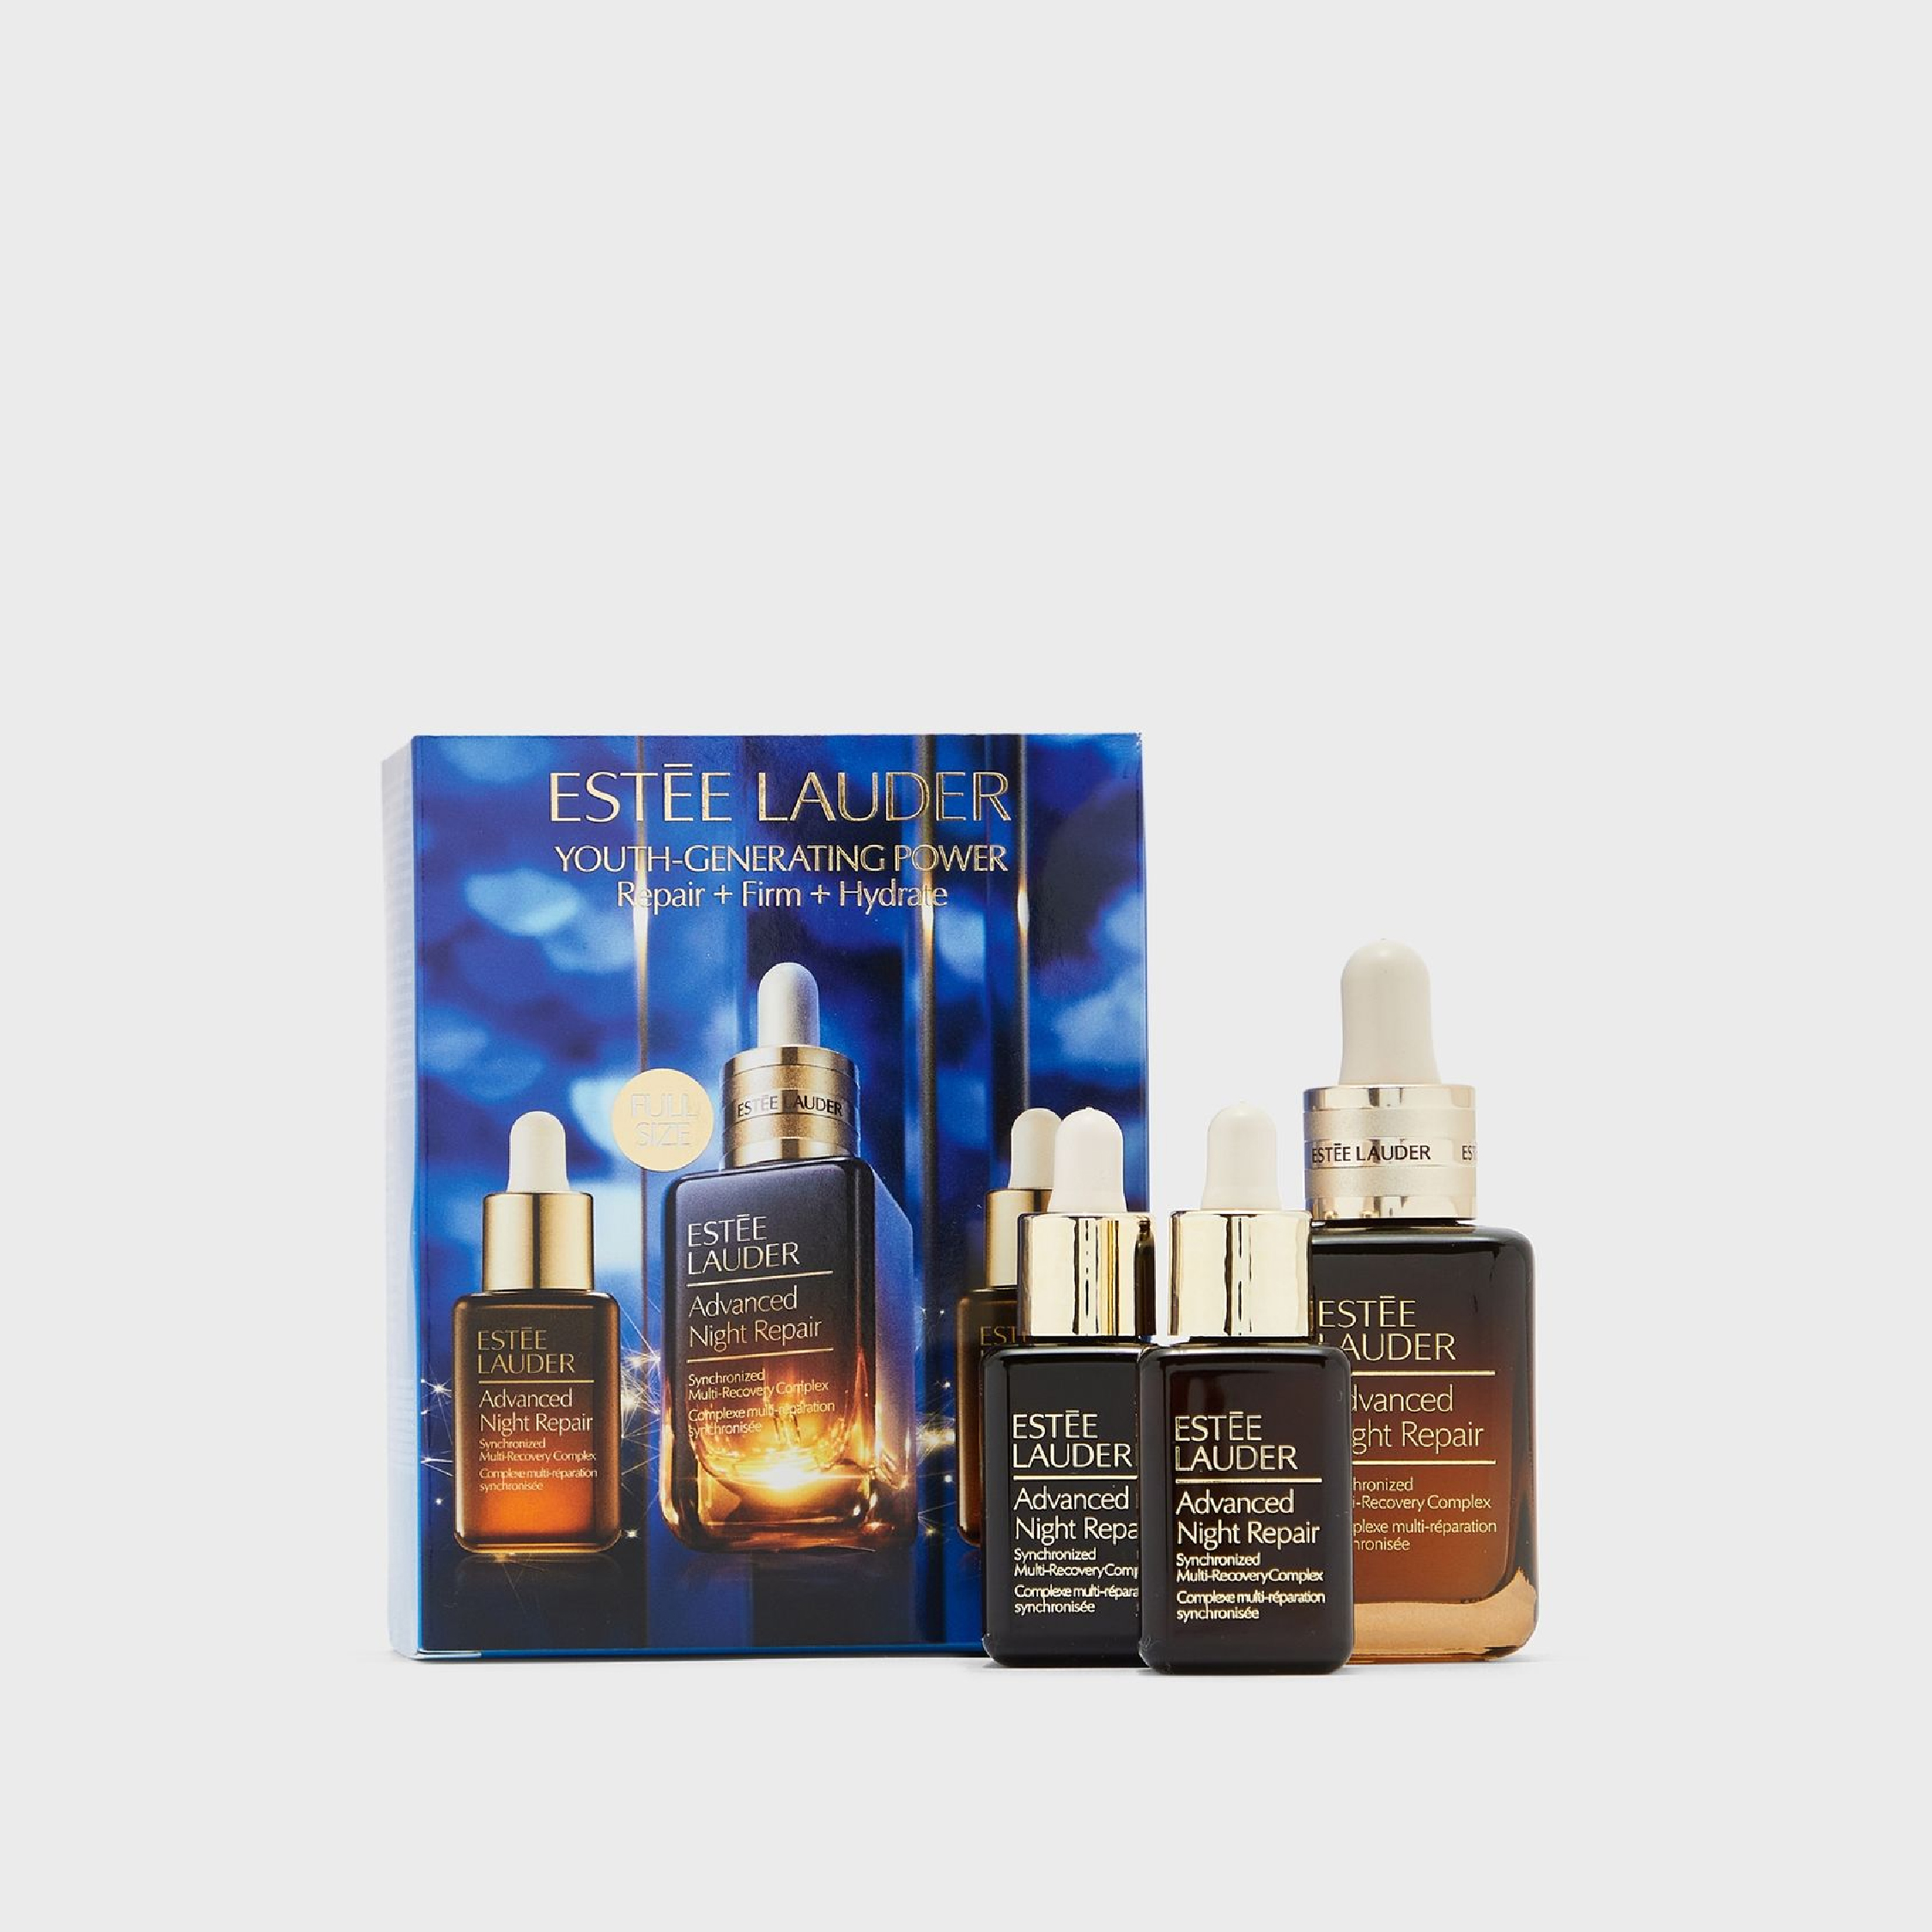 ESTEE LAUDER  Youth-Generating Power Repair. Firm. Hydrate SET (Limited Edition)